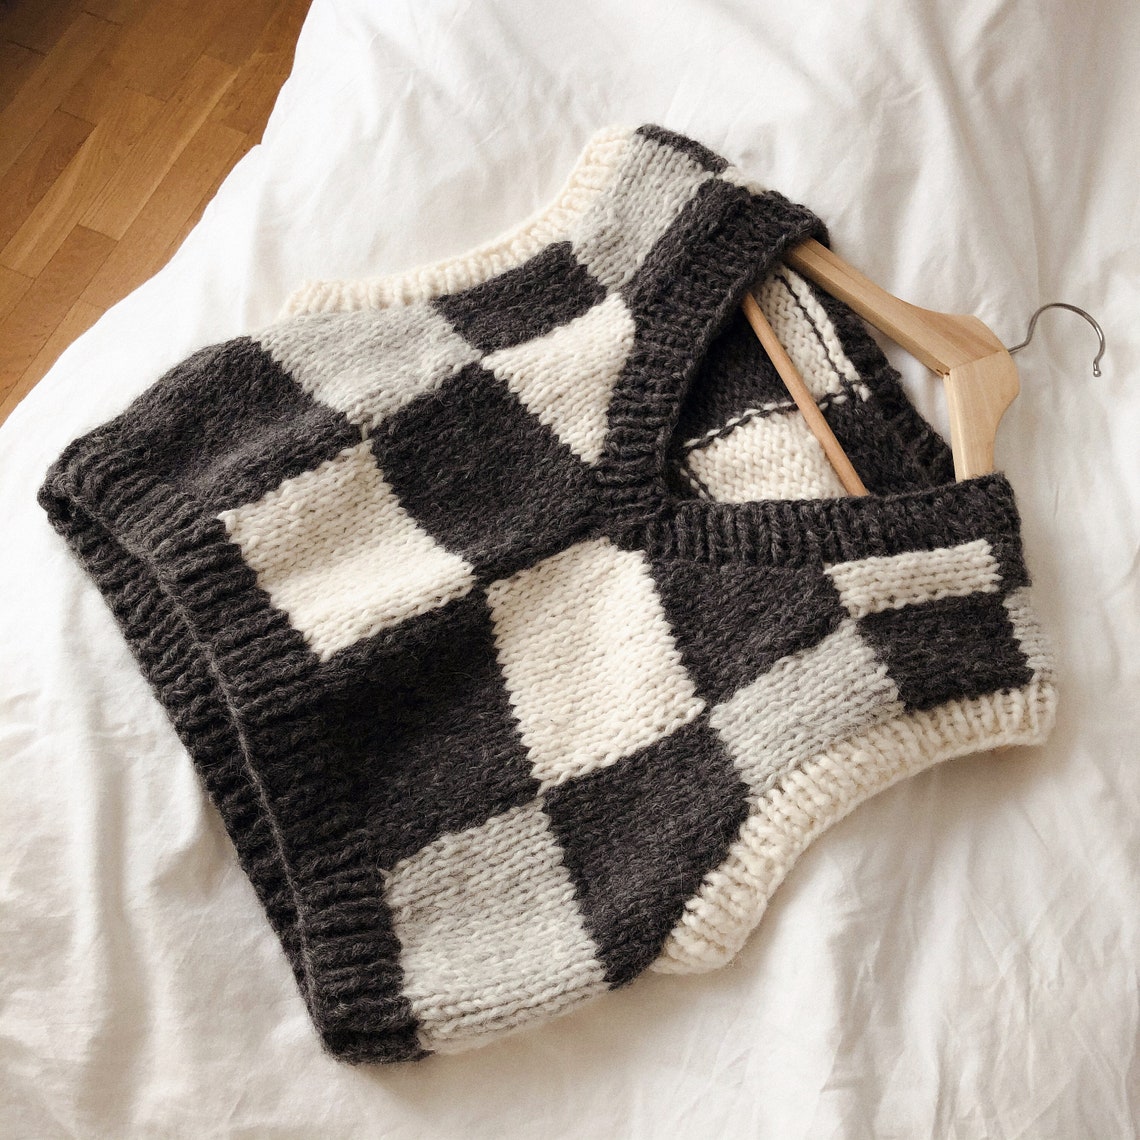 Knit a Classic V-Neck Vest ... Suitable Project For a Beginner!